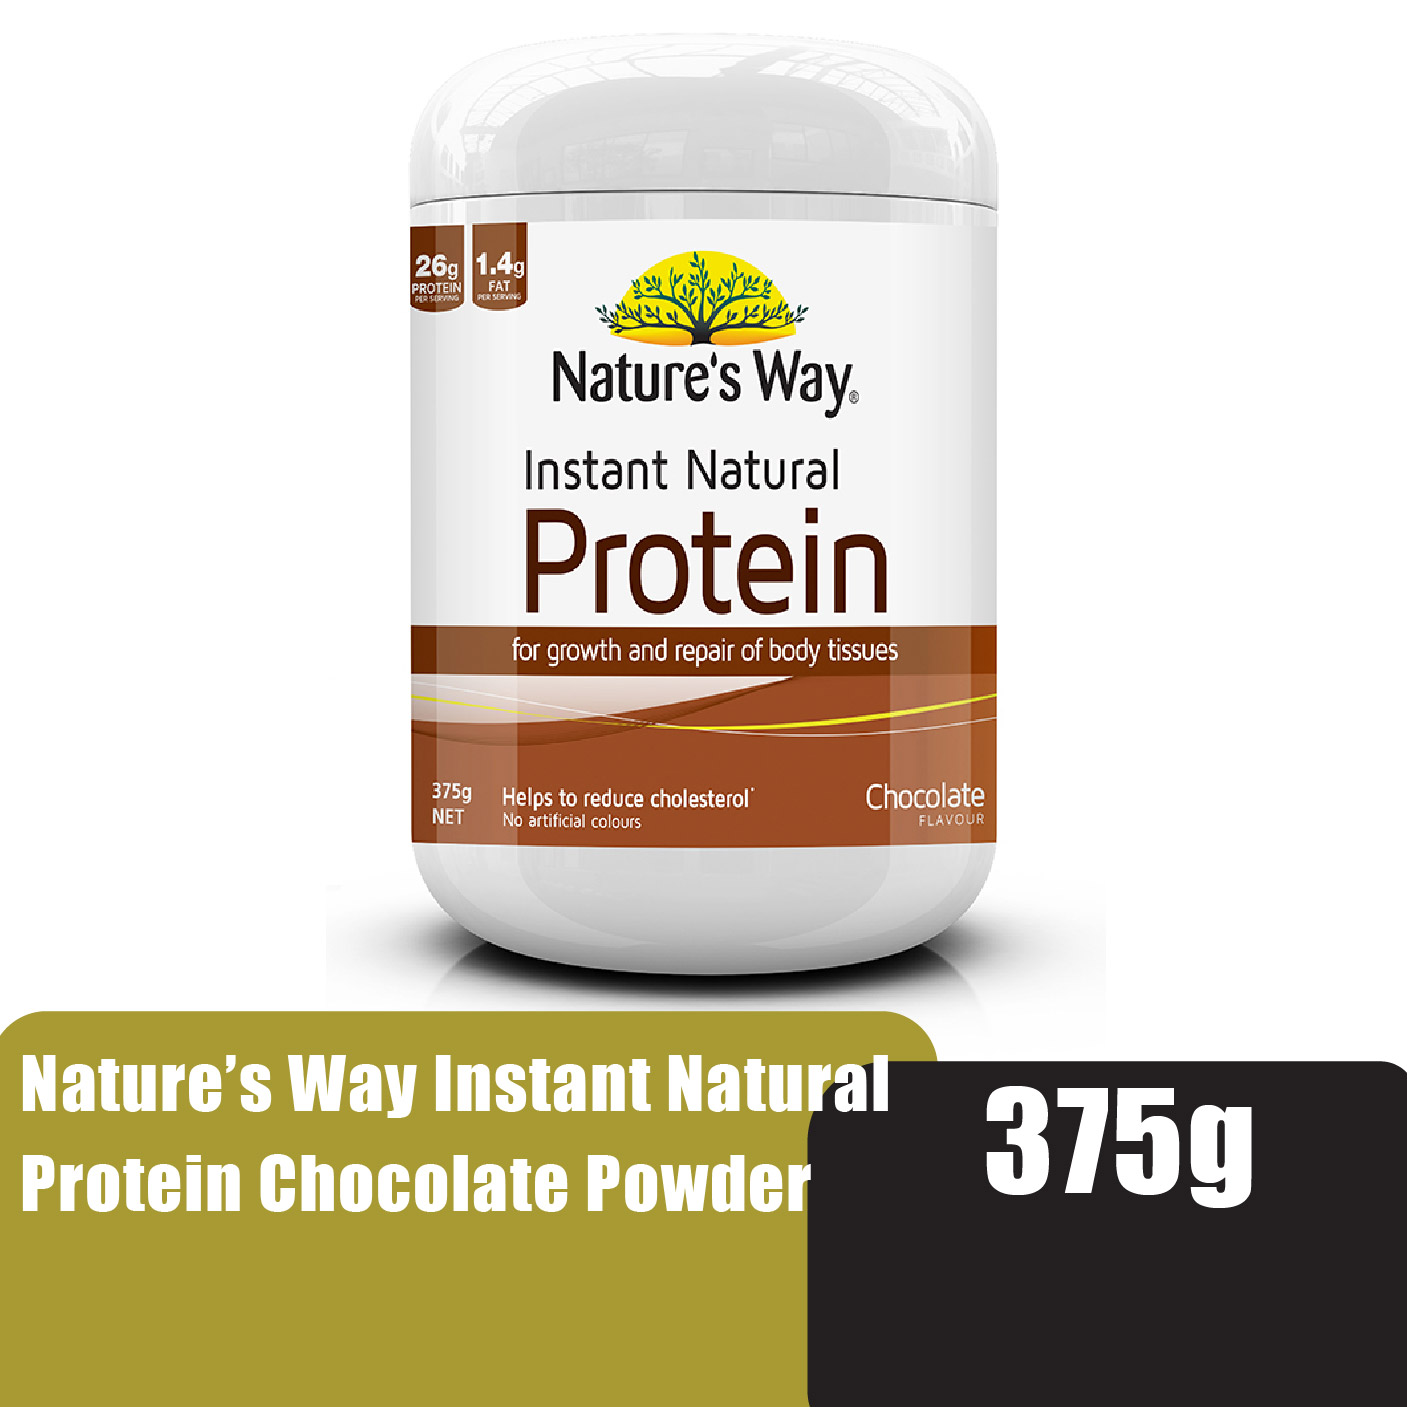 Nature's Way Daily Instant Protein Powder (Chocolate flavour)375g helps to reduce cholesterol -(Suitable for halal)